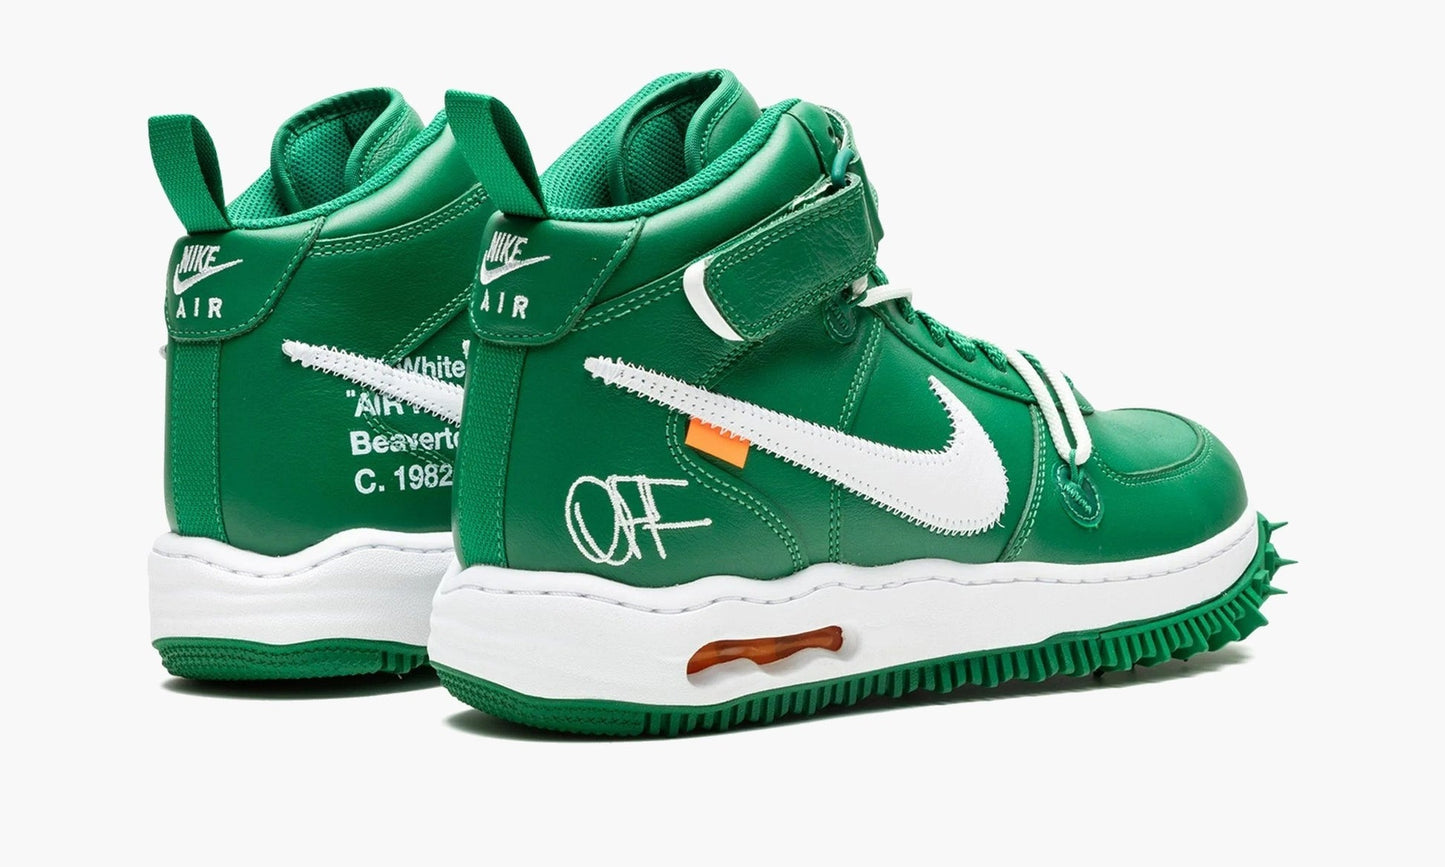 Air Force 1 Mid "Off-White - Pine Green" - DR0500 300 | Grailshop